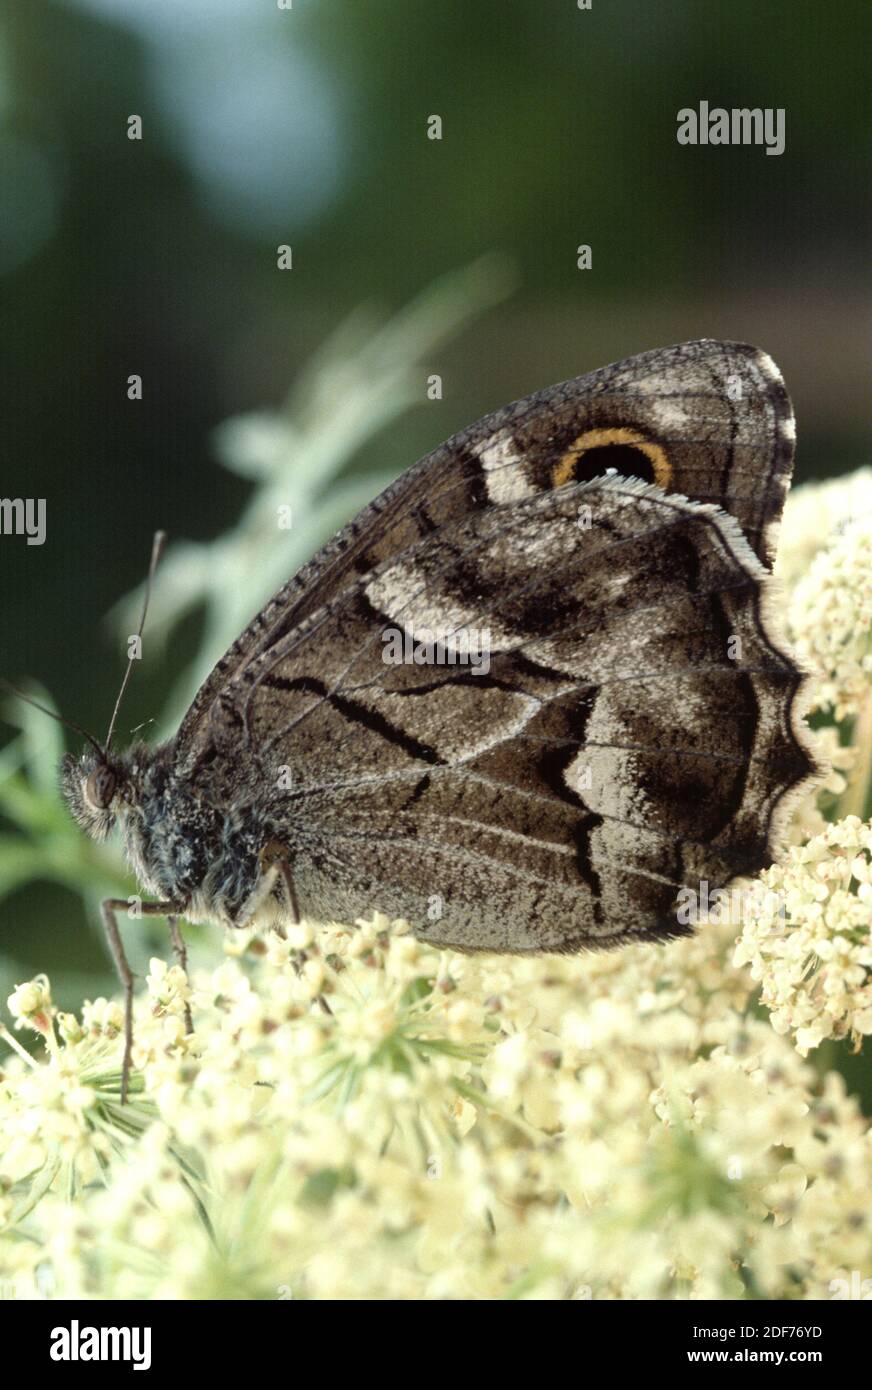 Striped grayling (Hipparchia fidia or Pseudotergumia fidia) is a butterfly native to western Mediterranean Basin. Adult. Stock Photo